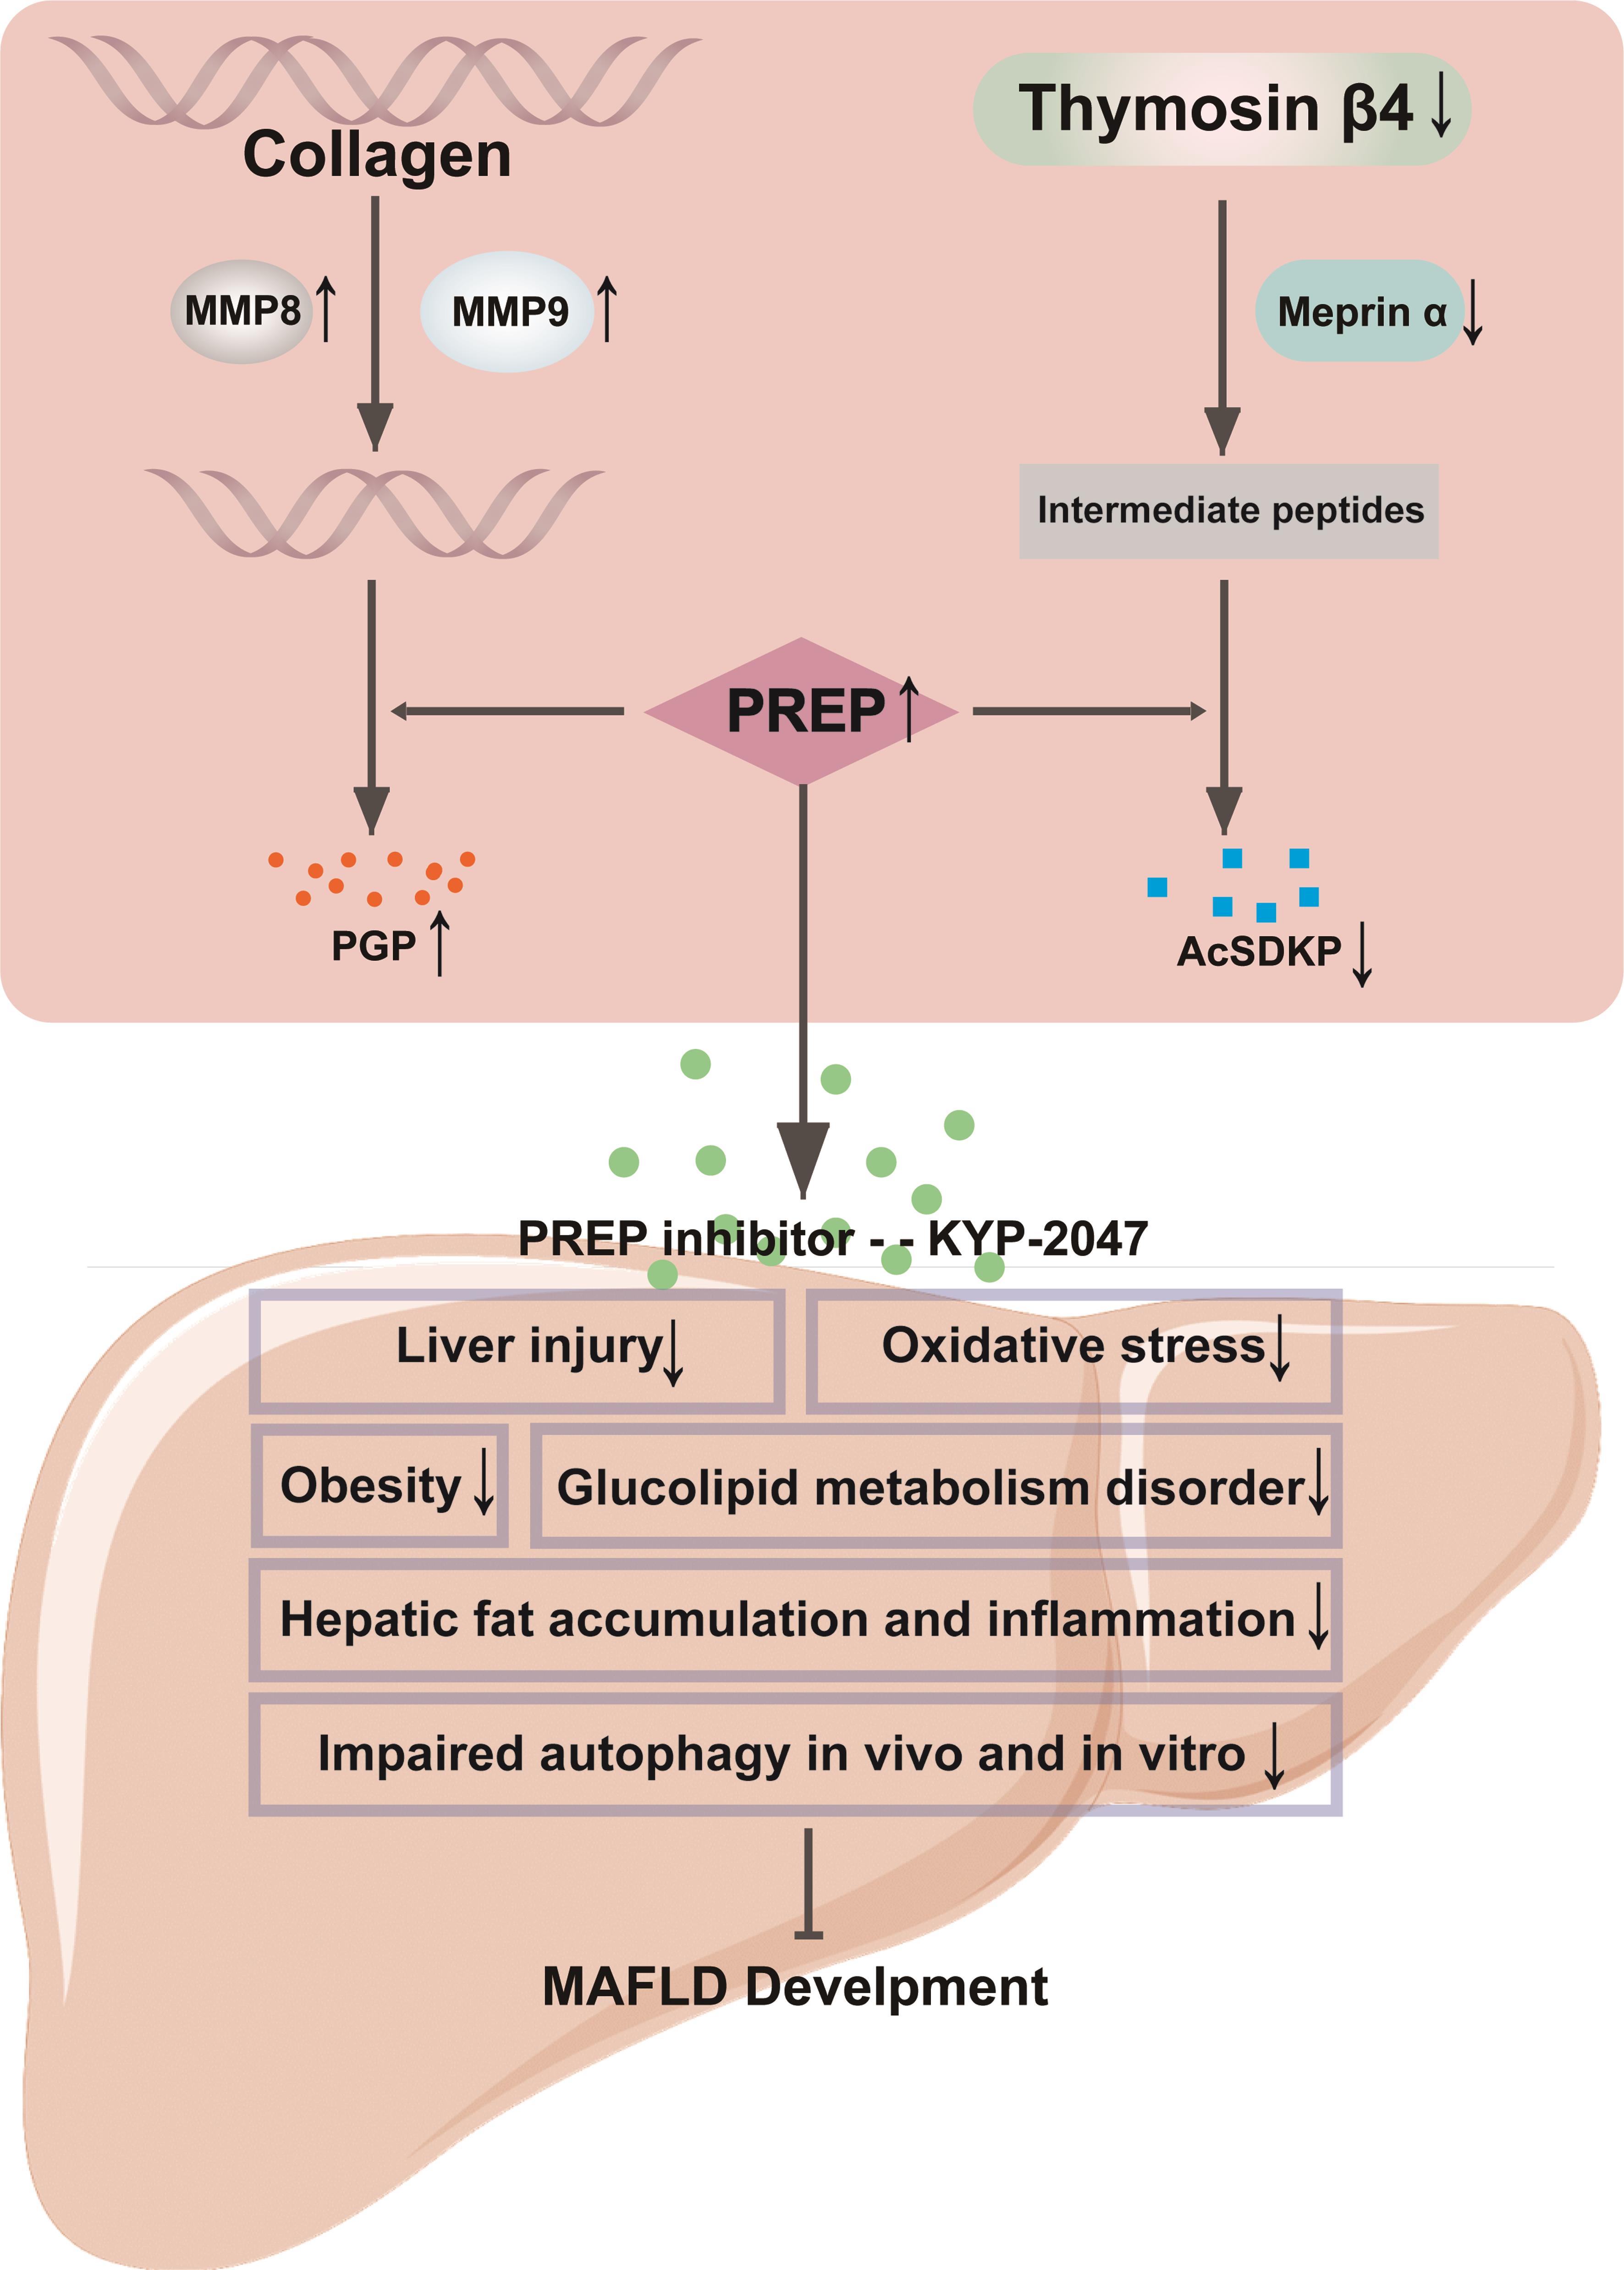 The PREP-PGP/AcSDKP system was developing in the direction of proinflammatory MMP8/9-PREP-PGP during MAFLD development, and PREP inhibitor exerted beneficial effects on MAFLD.